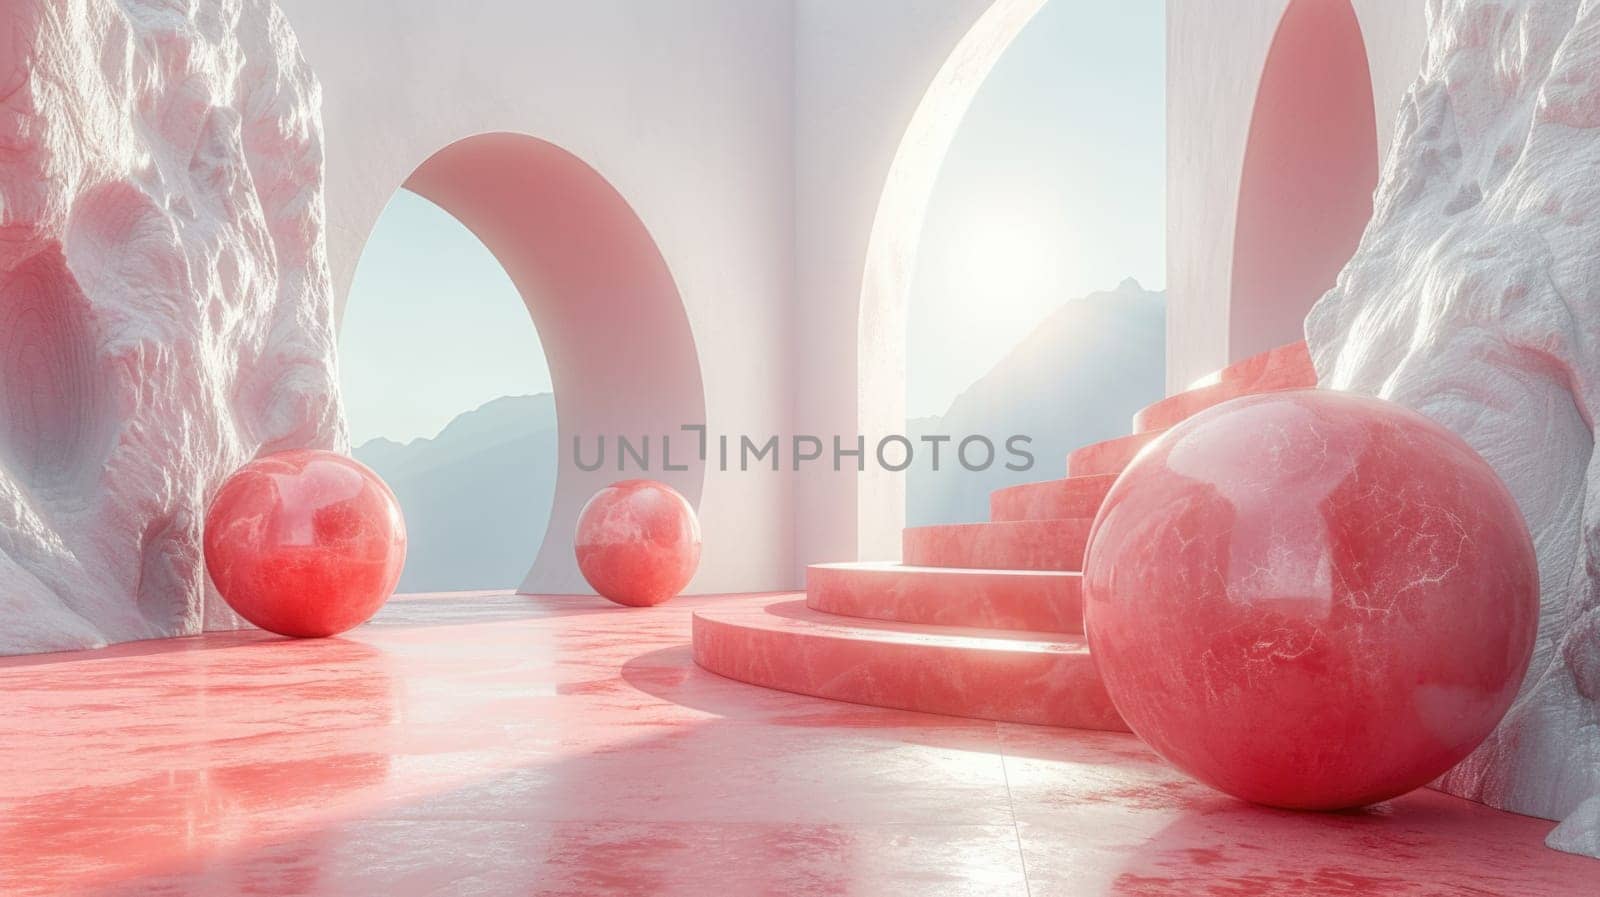 A room showcasing red balls scattered across the floor, surrounded by minimalist white walls.